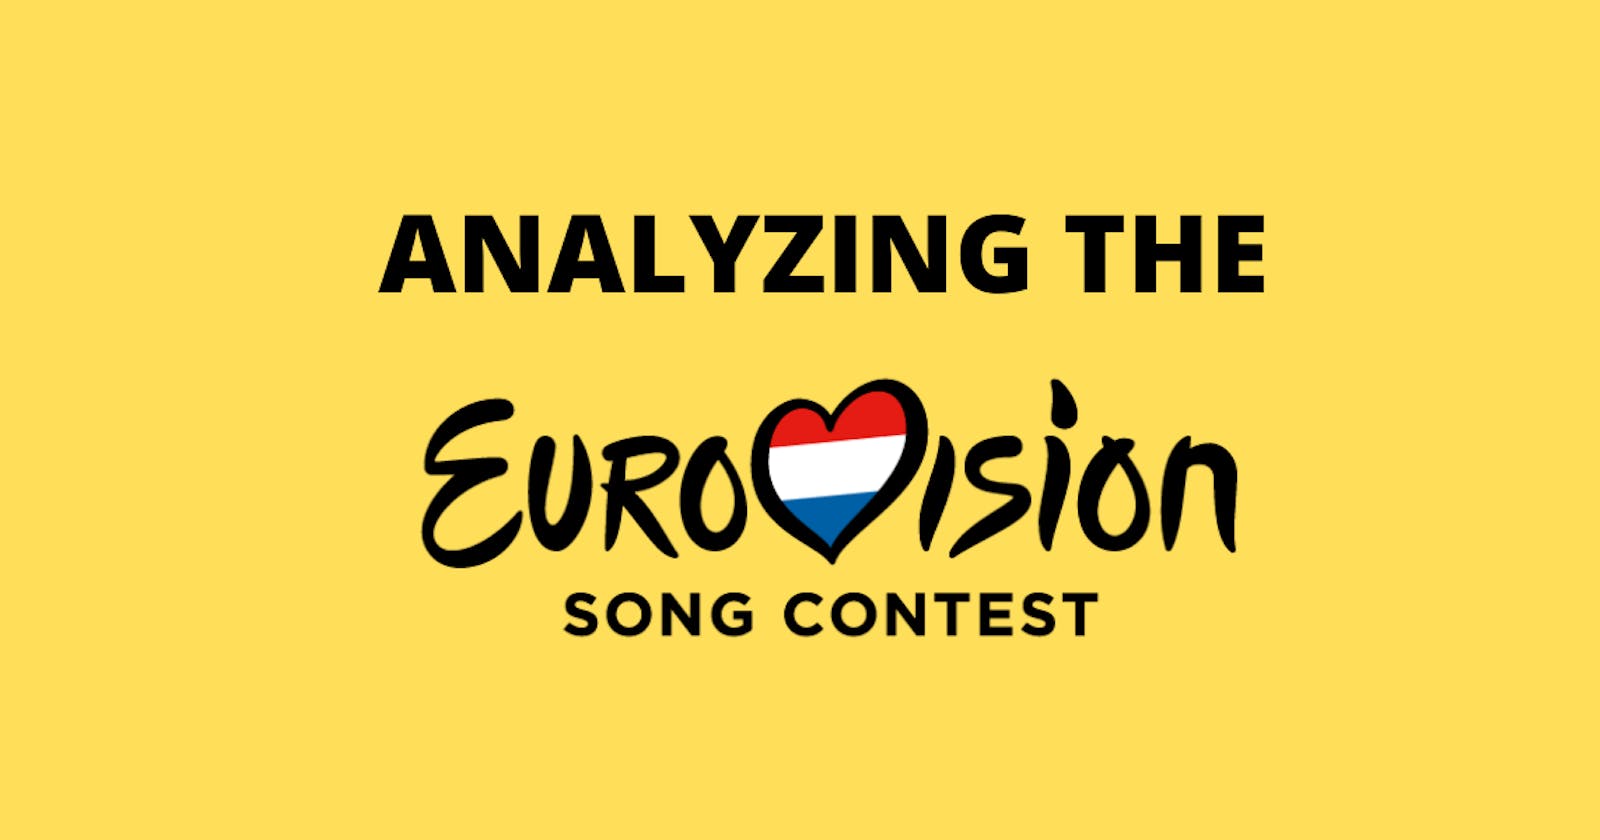 Analyzing the Eurovision Song Contest With Graphs